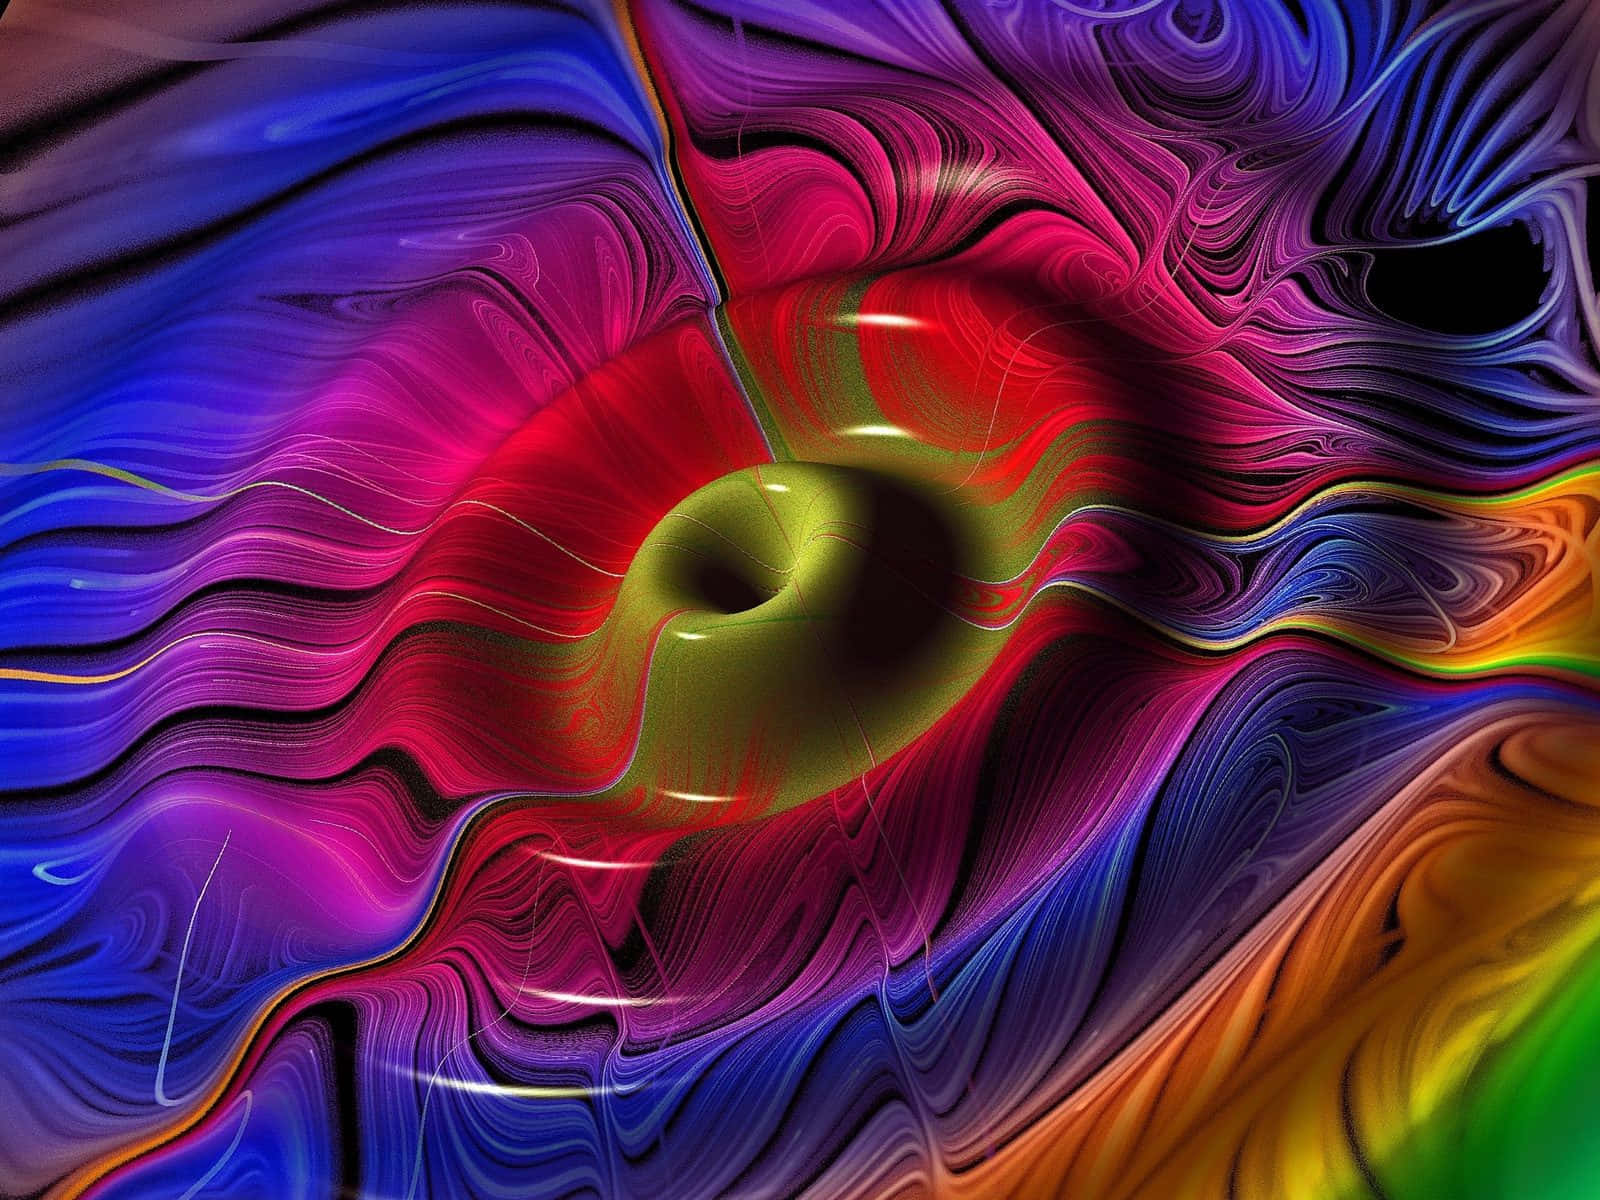 A Colorful Eye With Swirls And Swirls Wallpaper